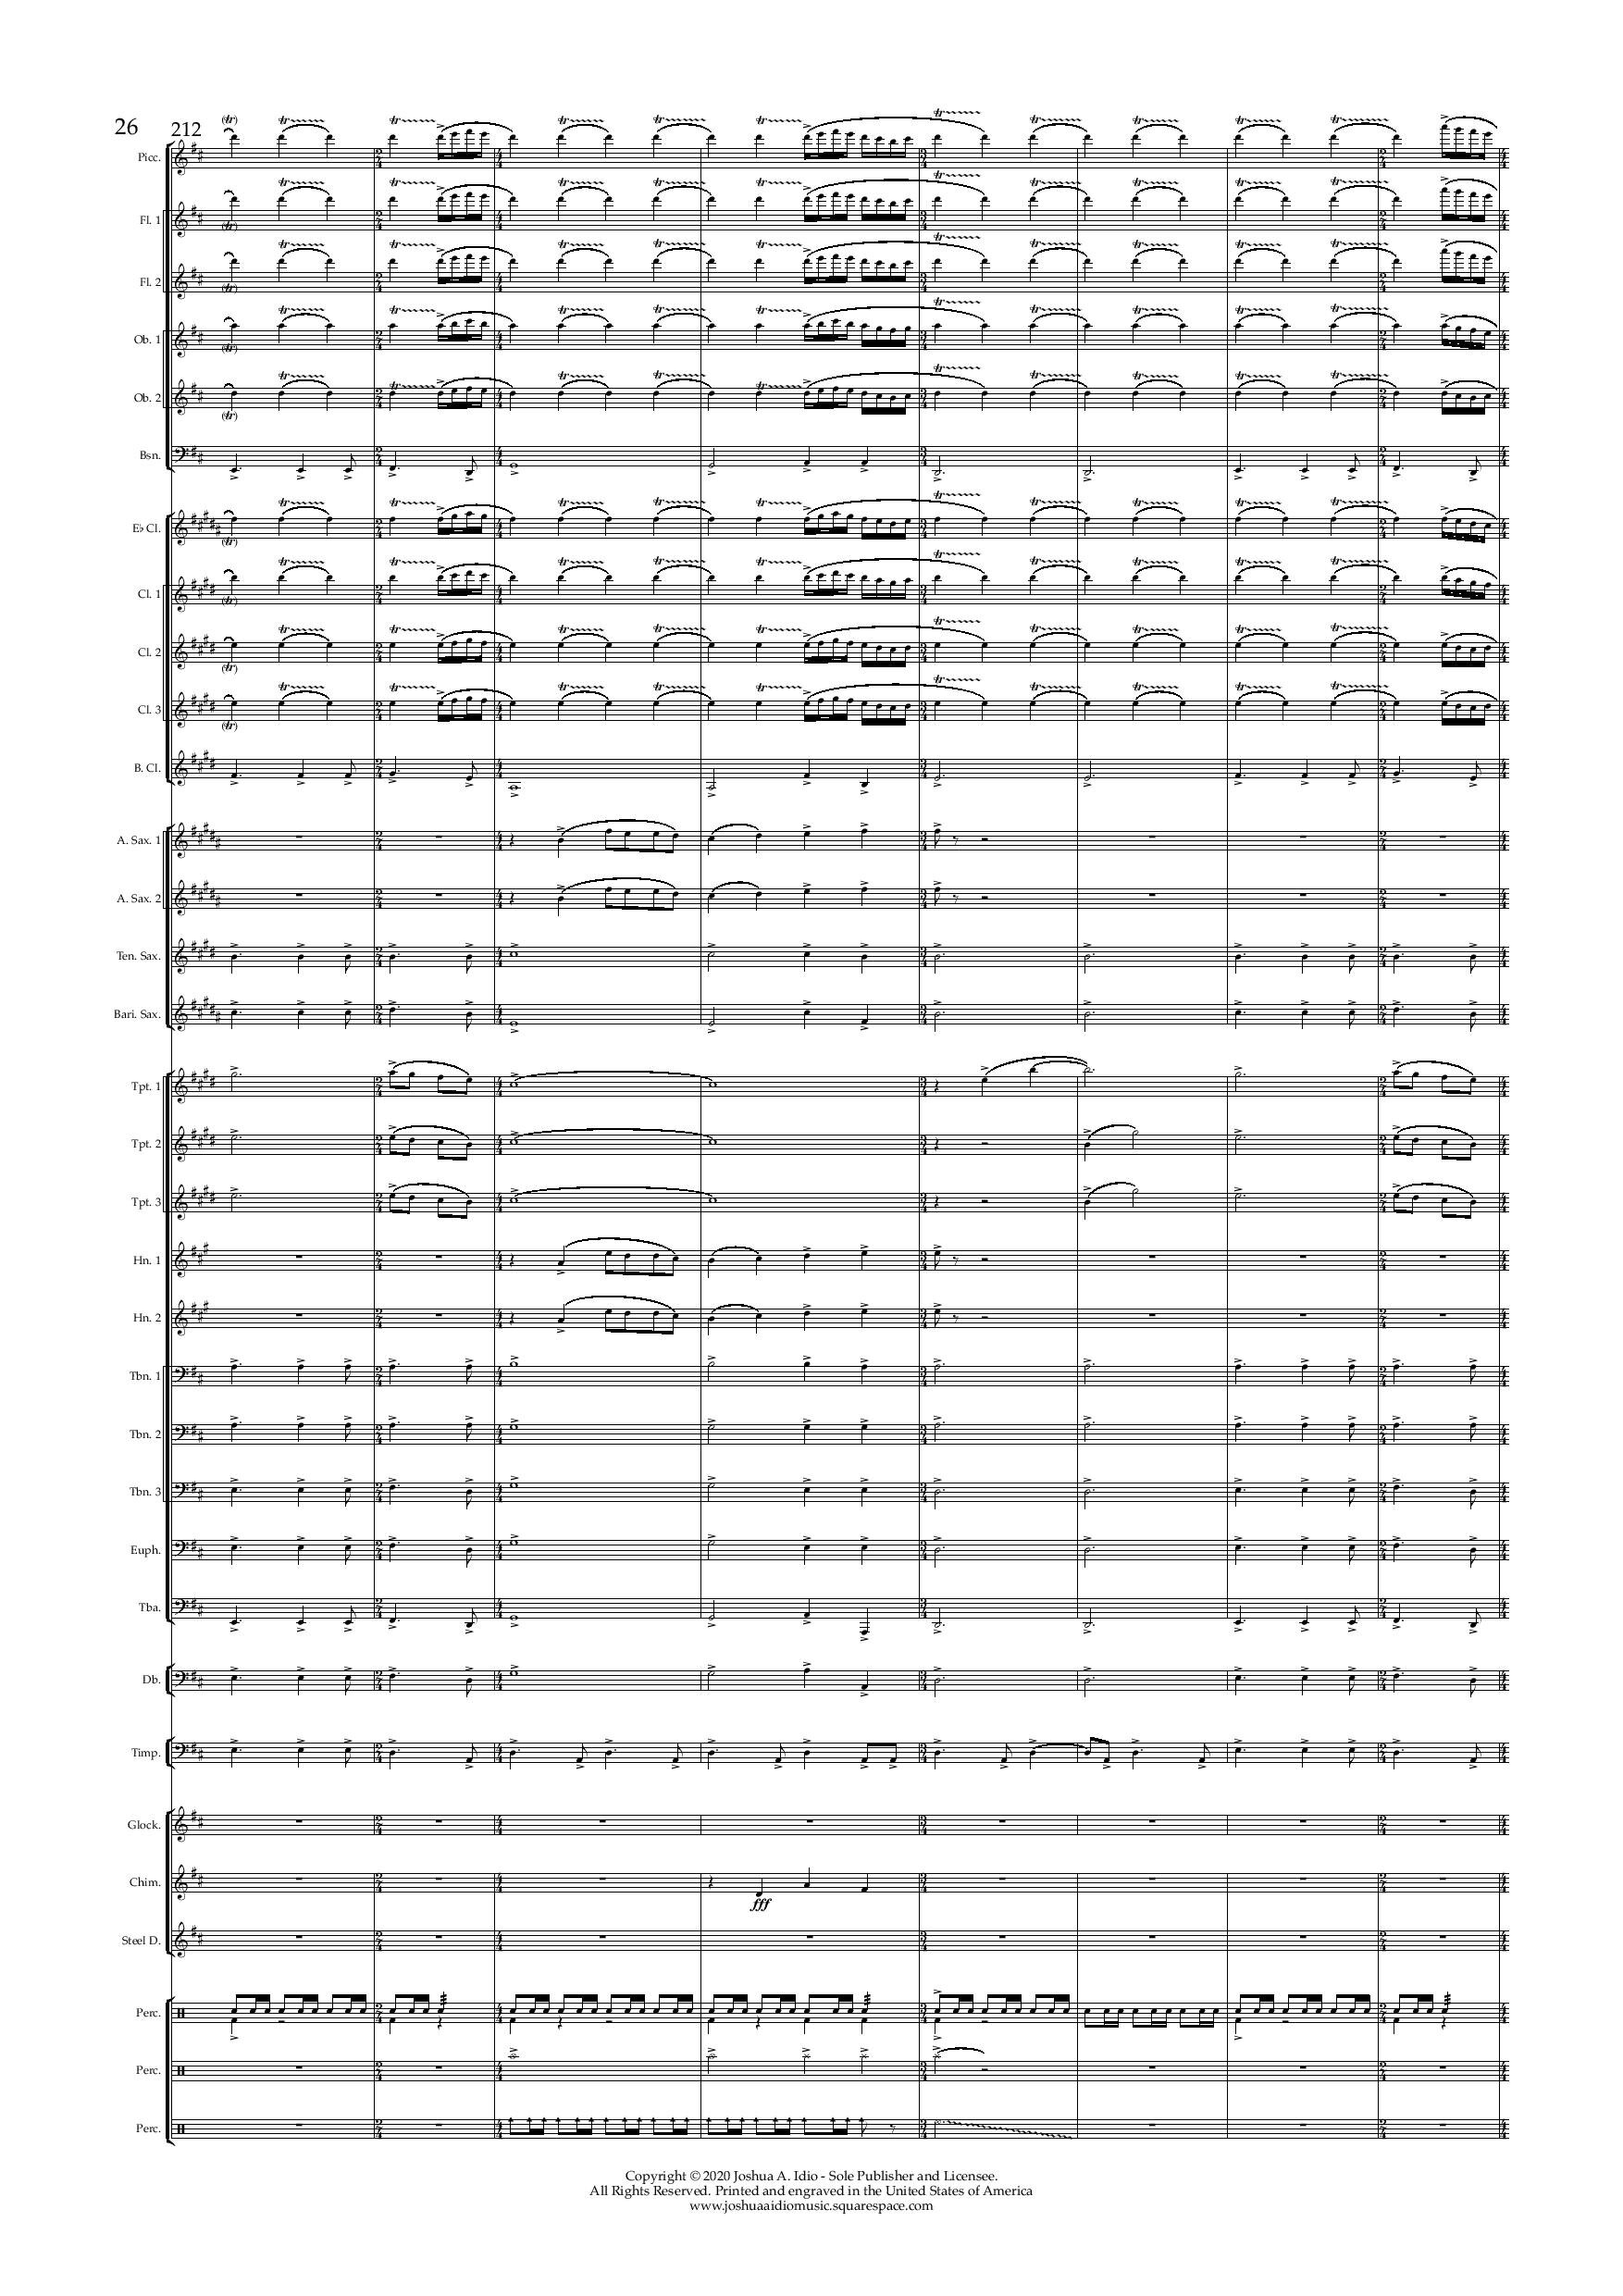 The Cruise Line Dream - Conductor s Score-page-026.jpg